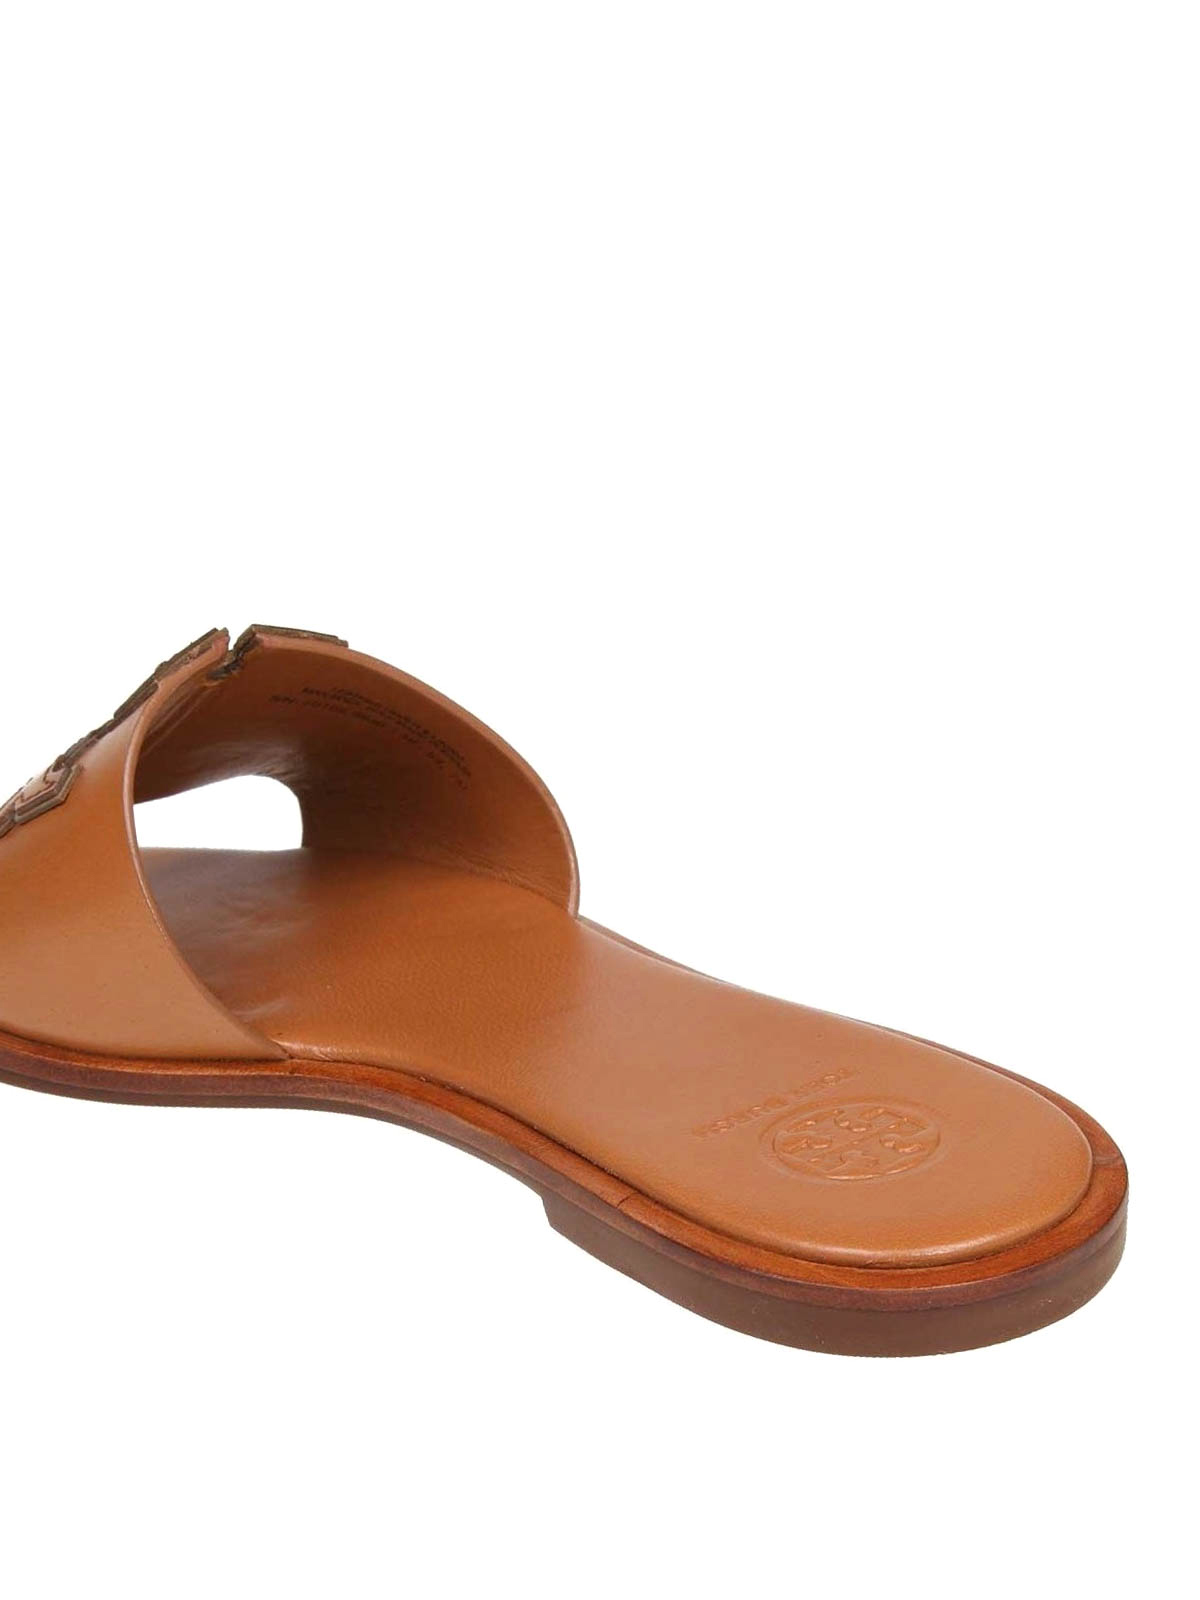 Tory Burch - Ines leather slide sandals 